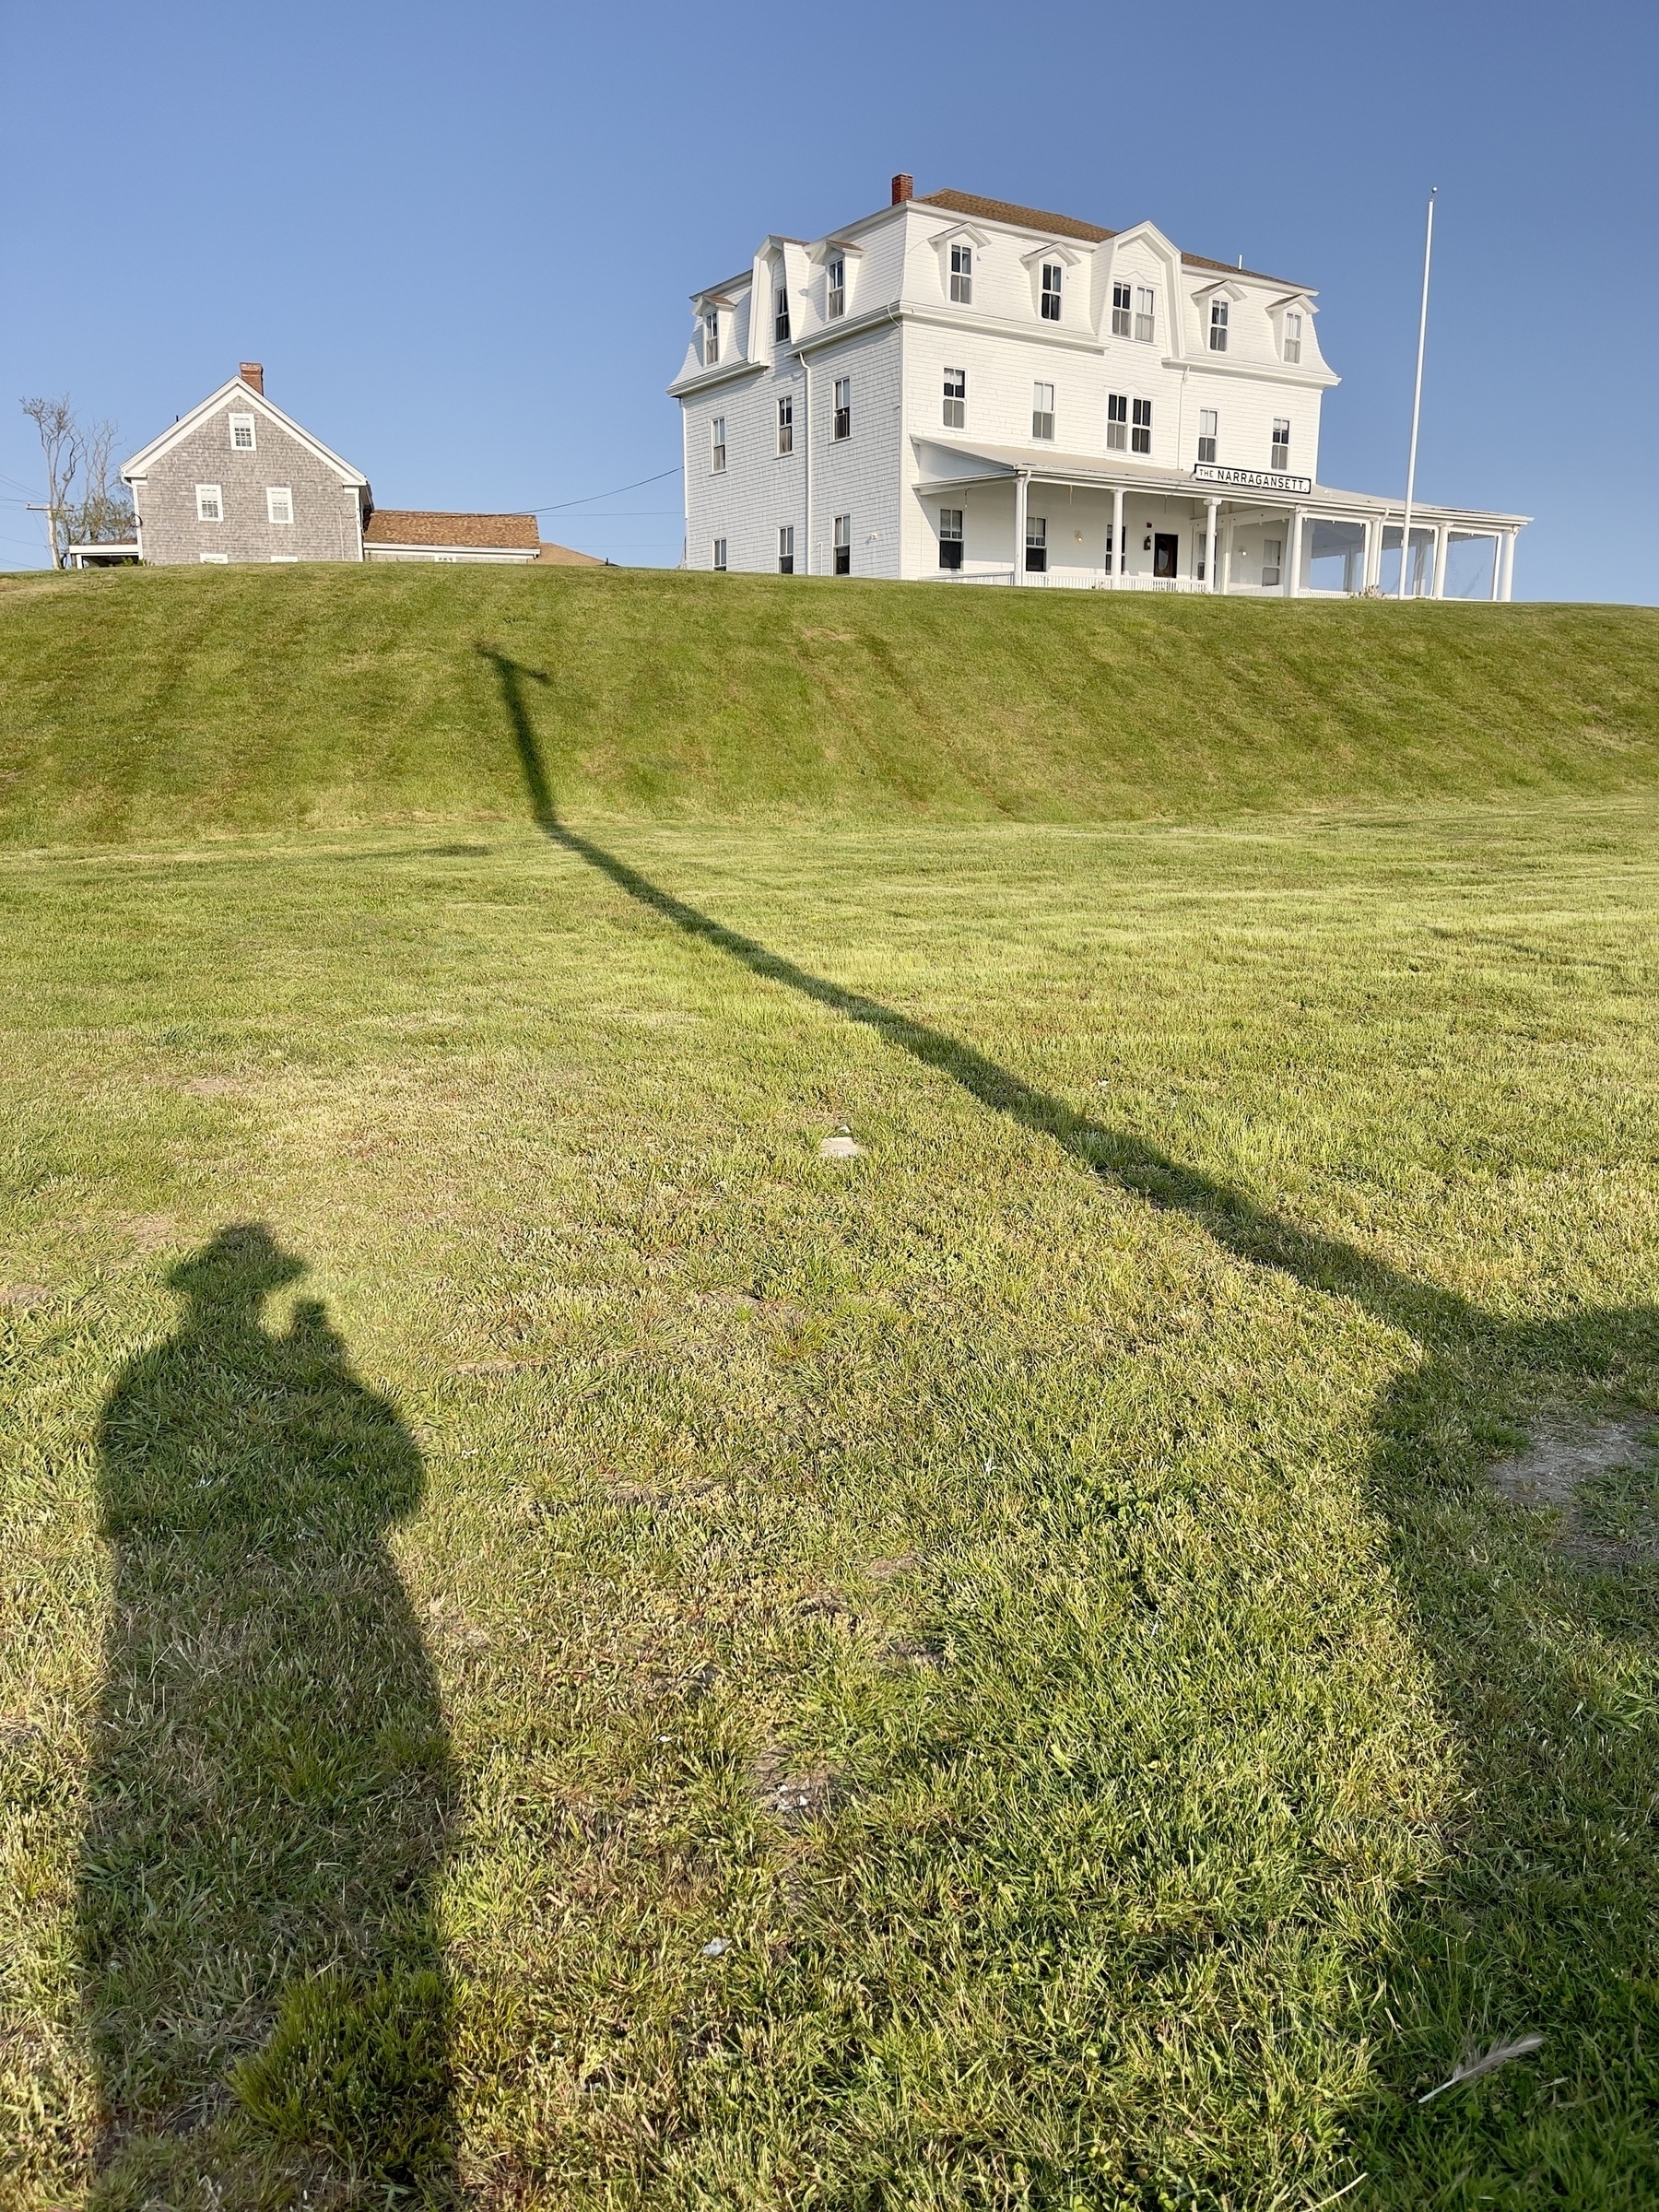 Narragansett Inn on hill with my shadow and shadow of utility pole in the foreground.